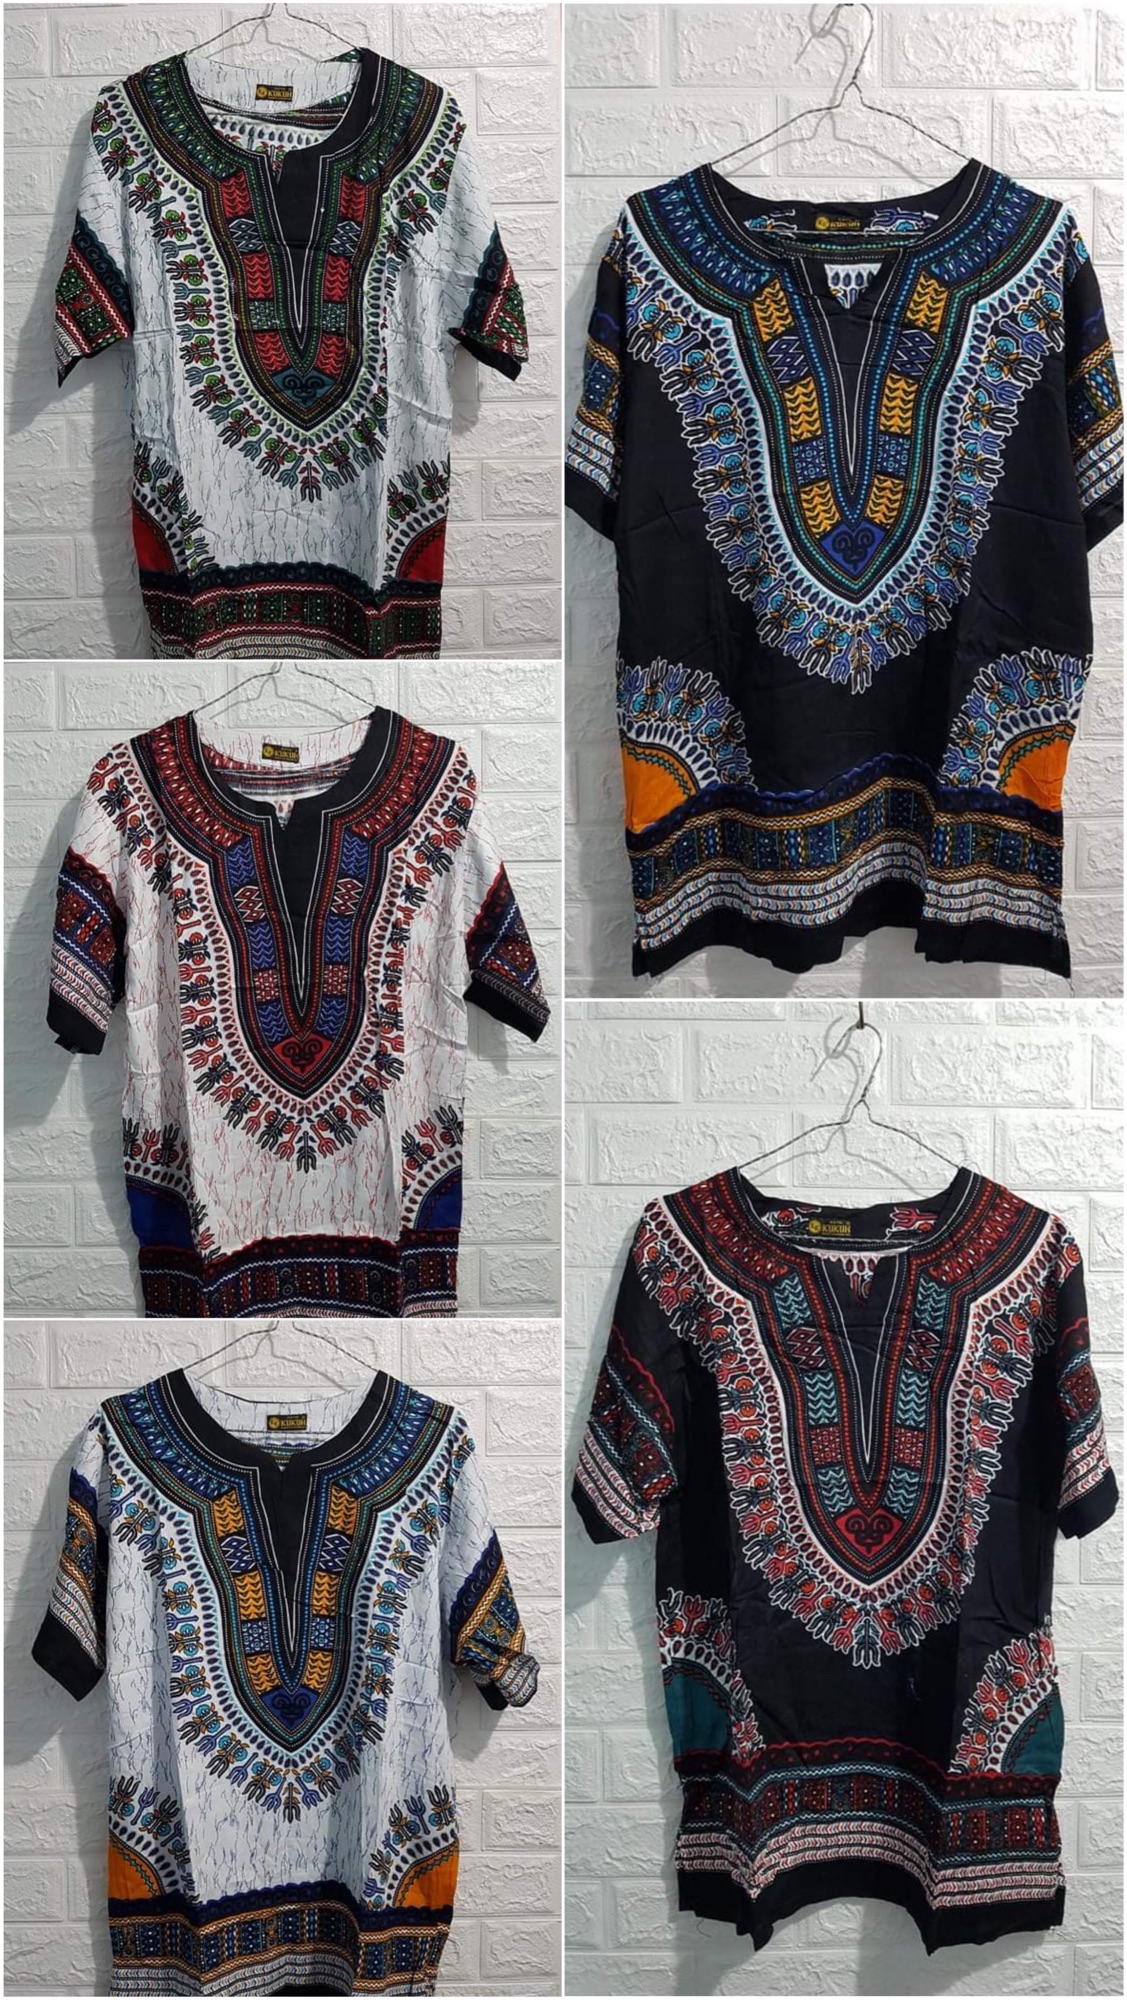 Summer Bohemian Embroidery Mexican Boho Cotton V Neck Loose Tops Shirt  Tunic Blouses Made in Bangkok For Men and Women Unisex